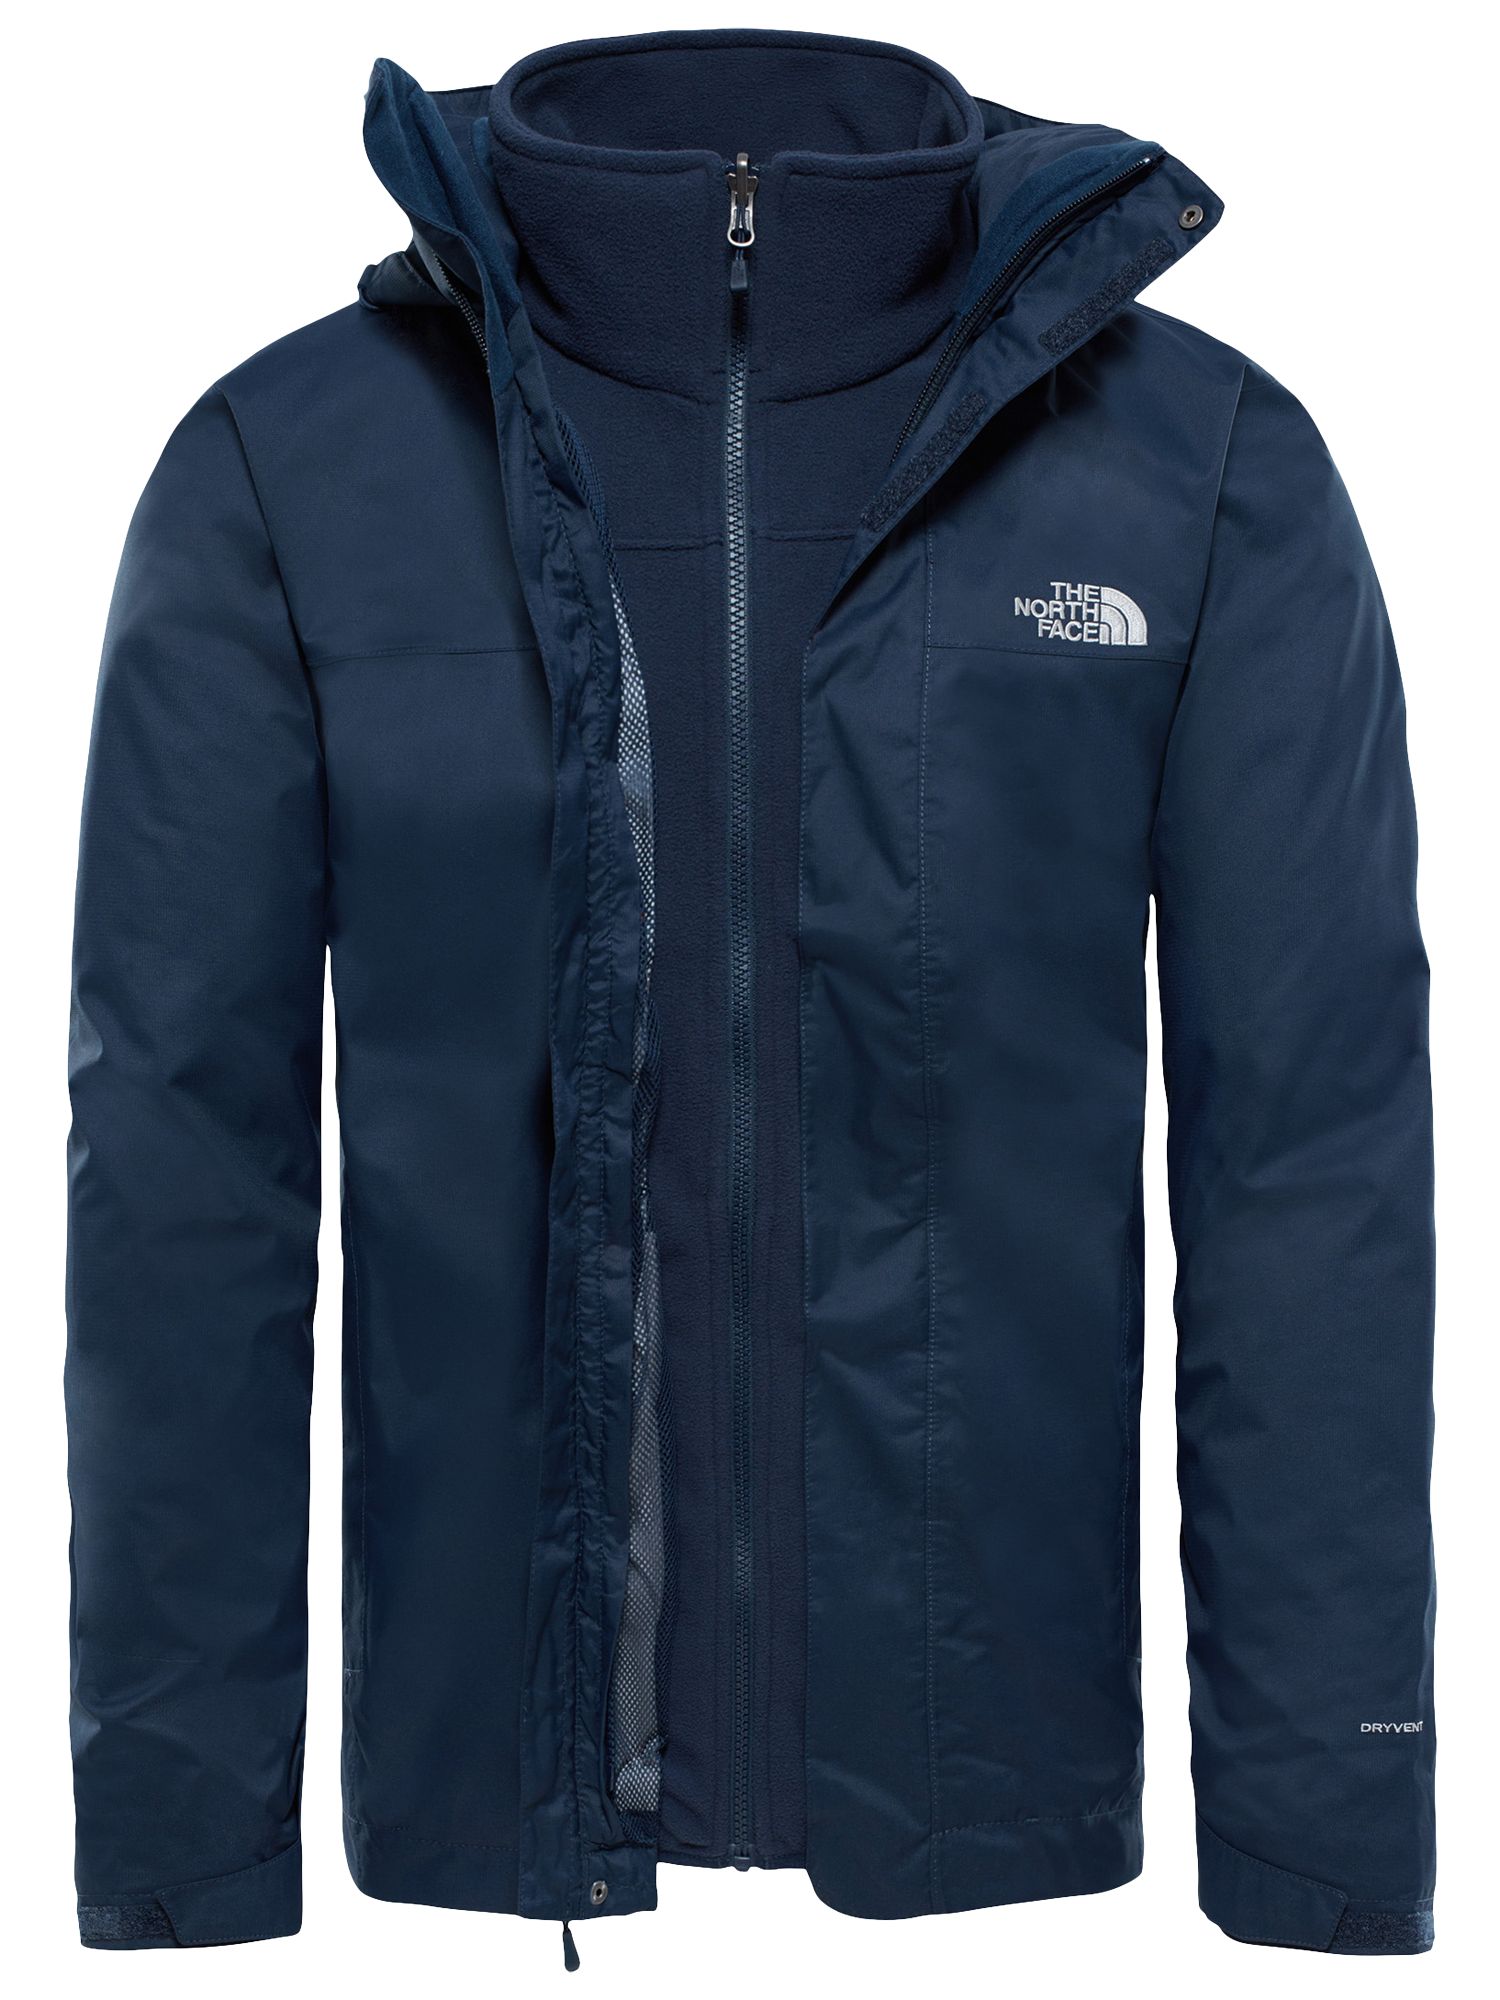 selsley triclimate jacket